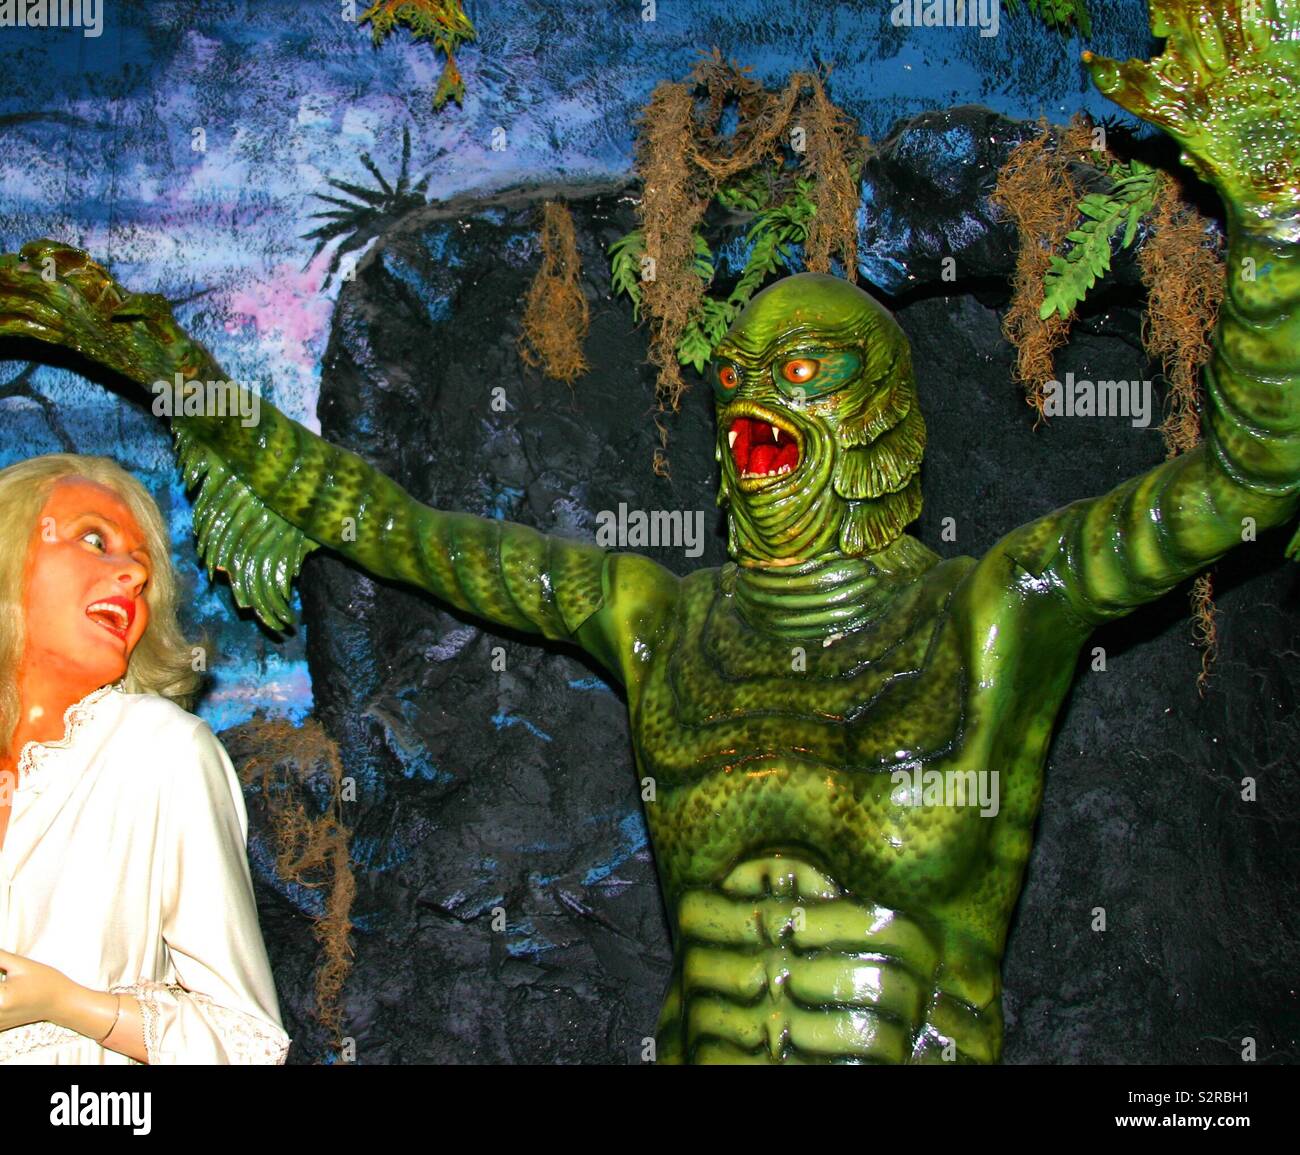 The Creature from the Black Lagoon waxwork tableau. Stock Photo